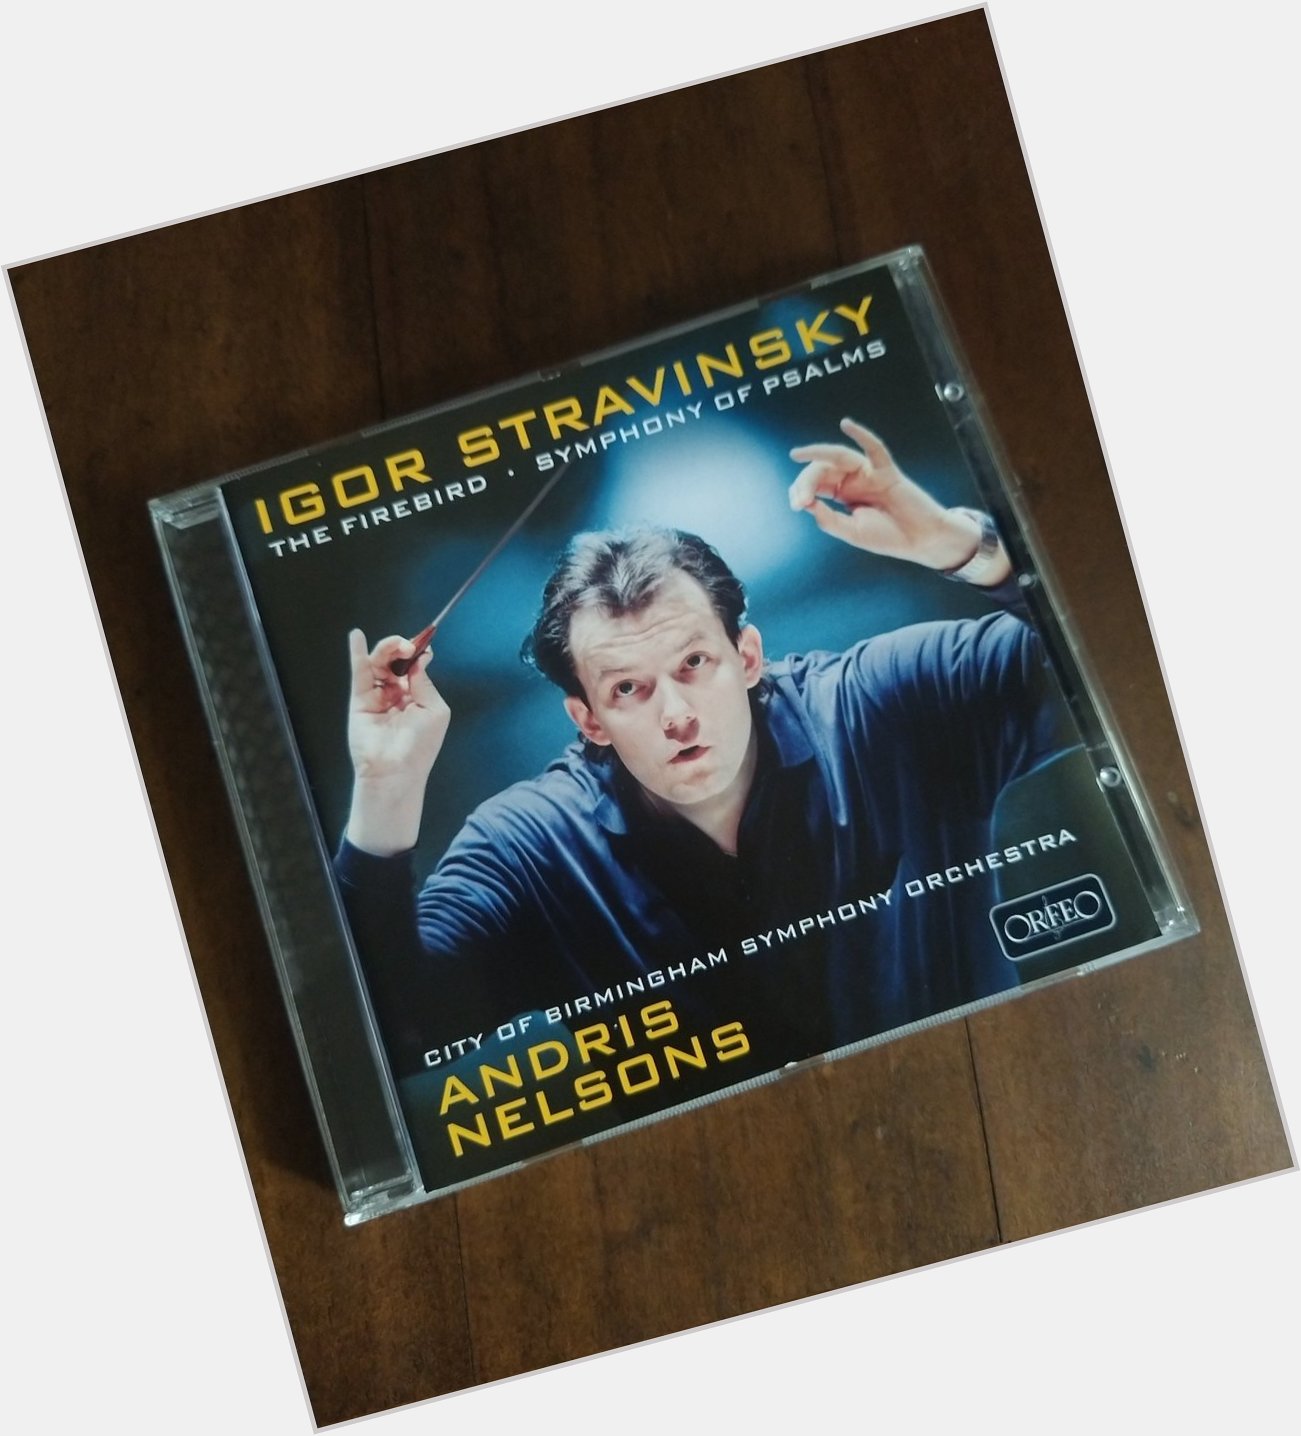 Also, happy birthday to Andris Nelsons. Truly admire many of his recordings.

 